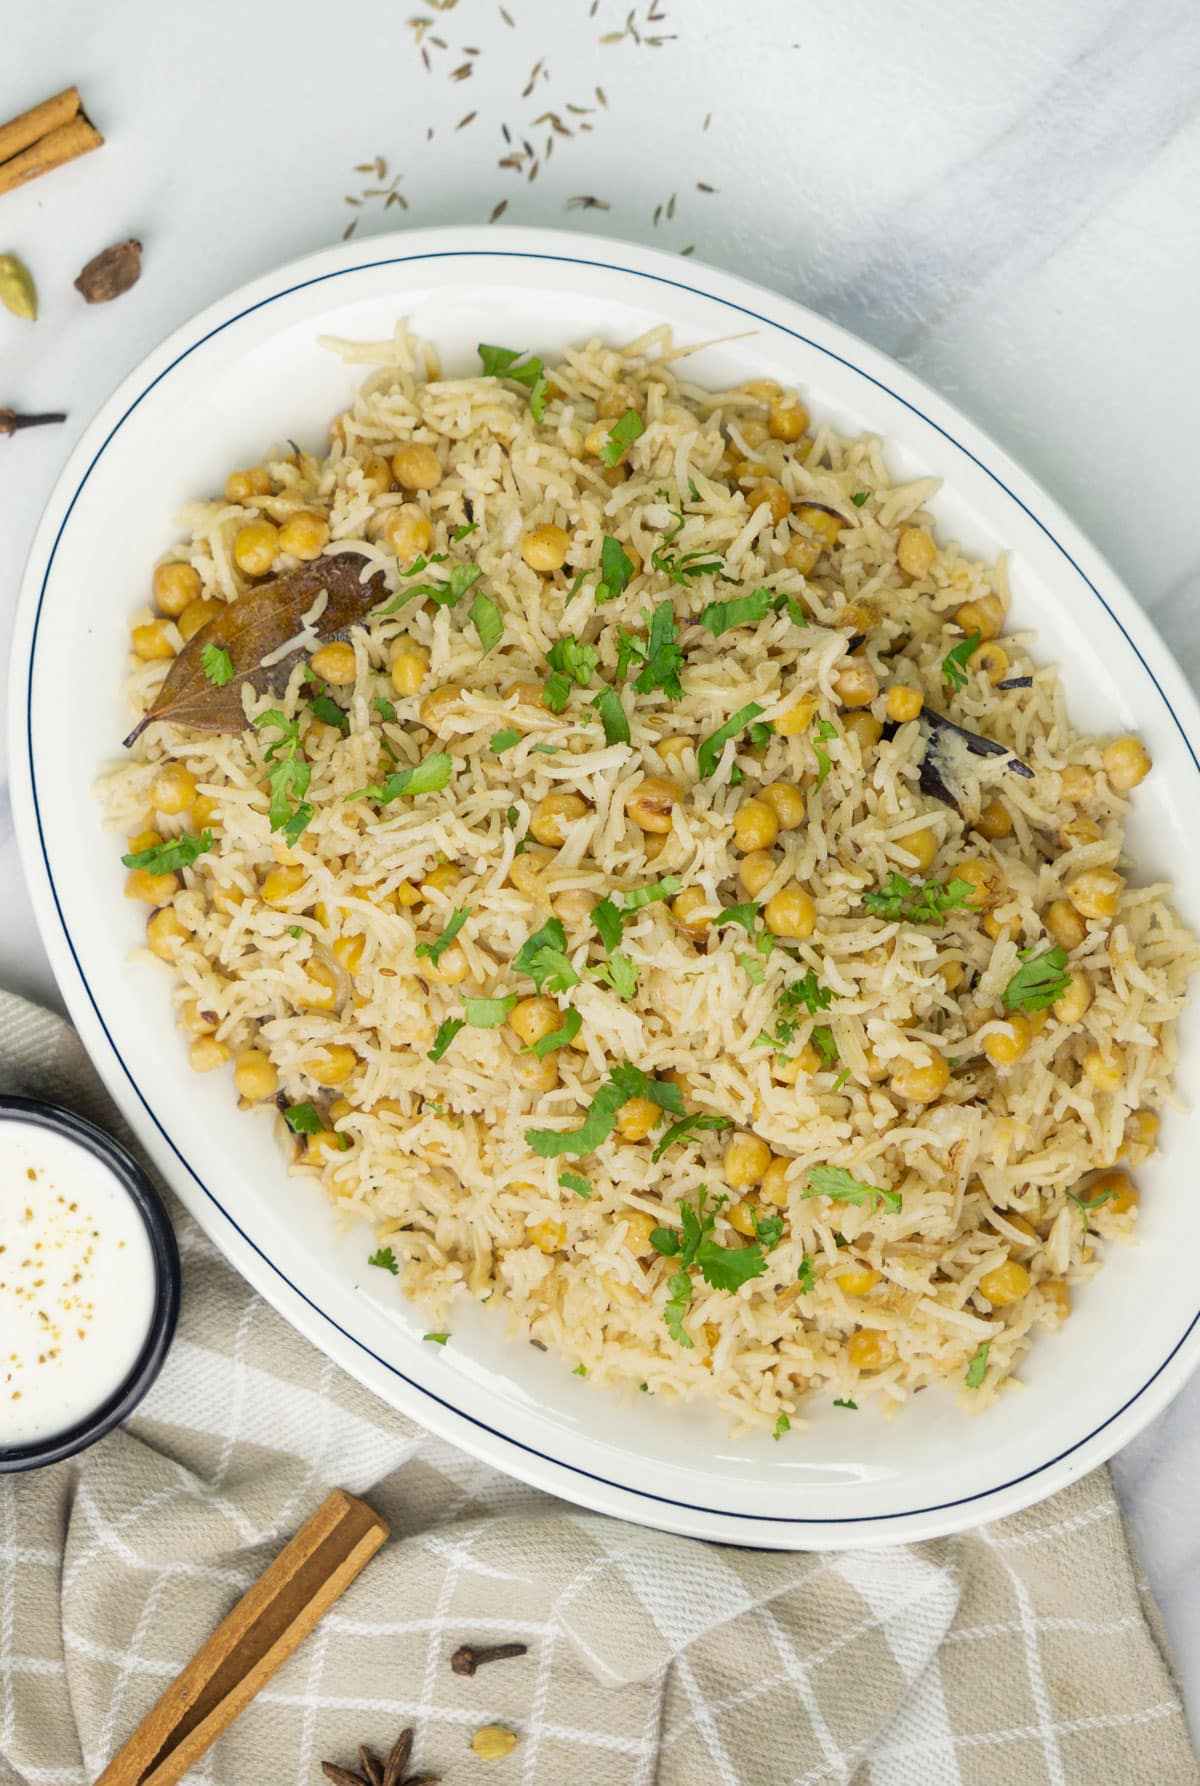 Chana Pulao with garnished with cilantro leaves and raita on the side.